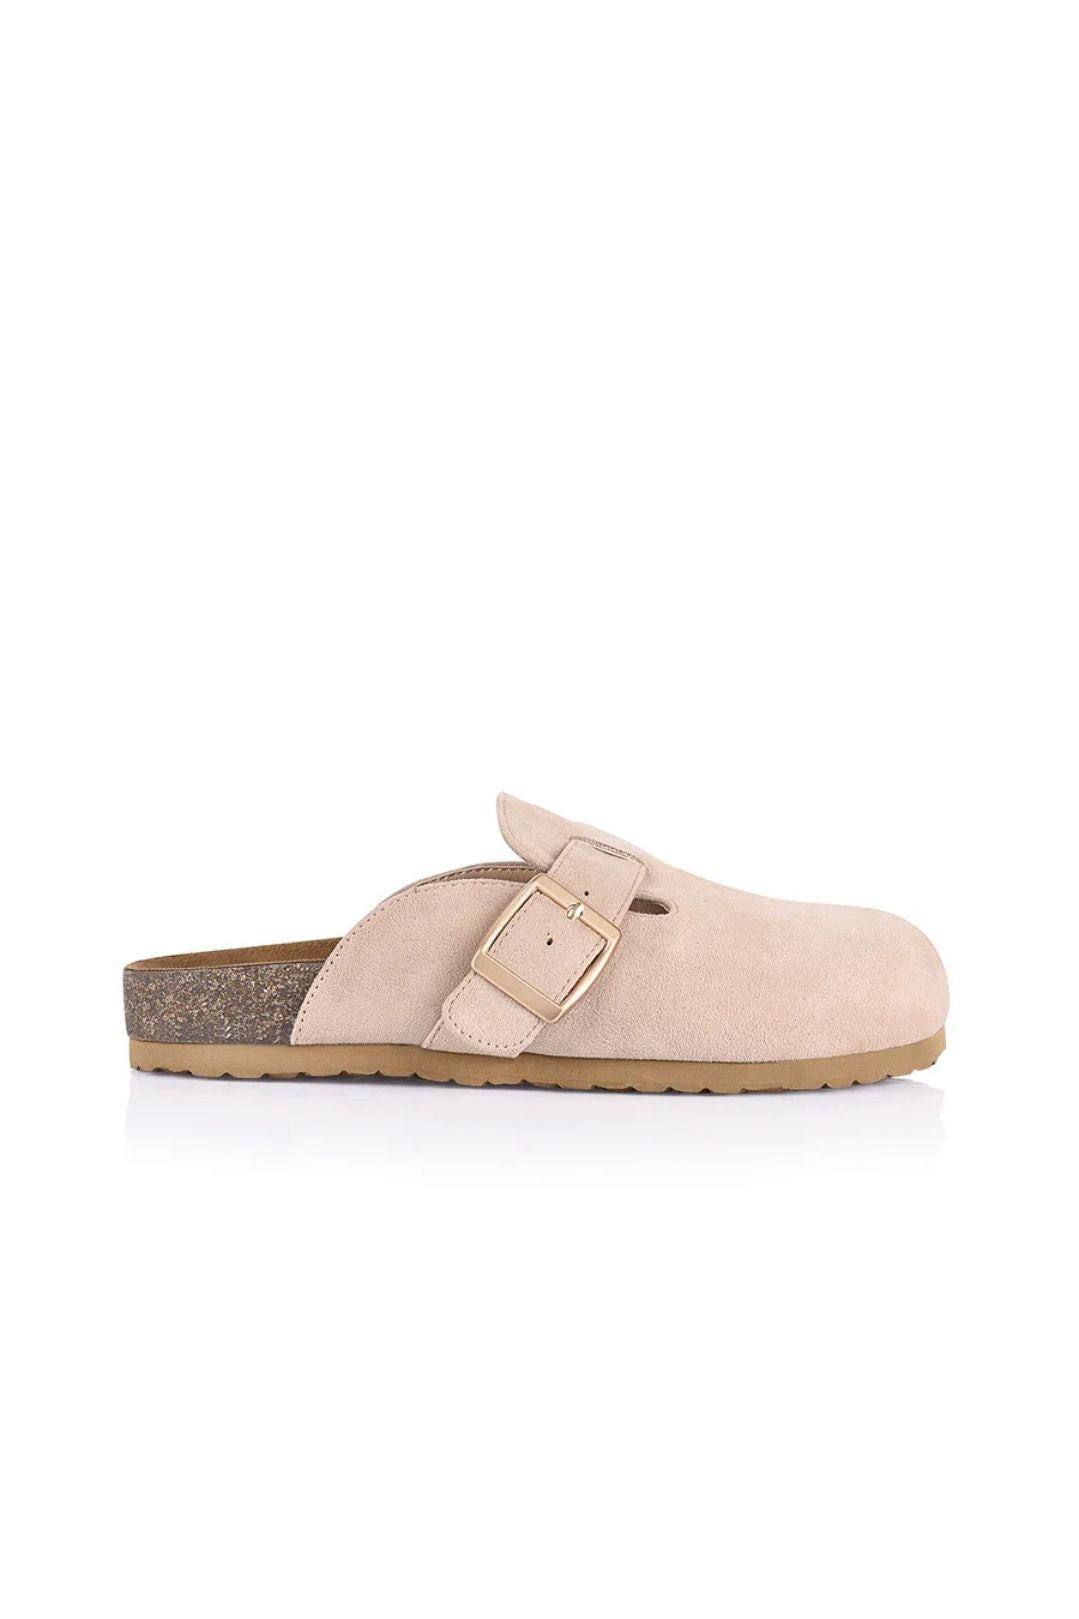 Xion Footbed Slides - Stone Micro